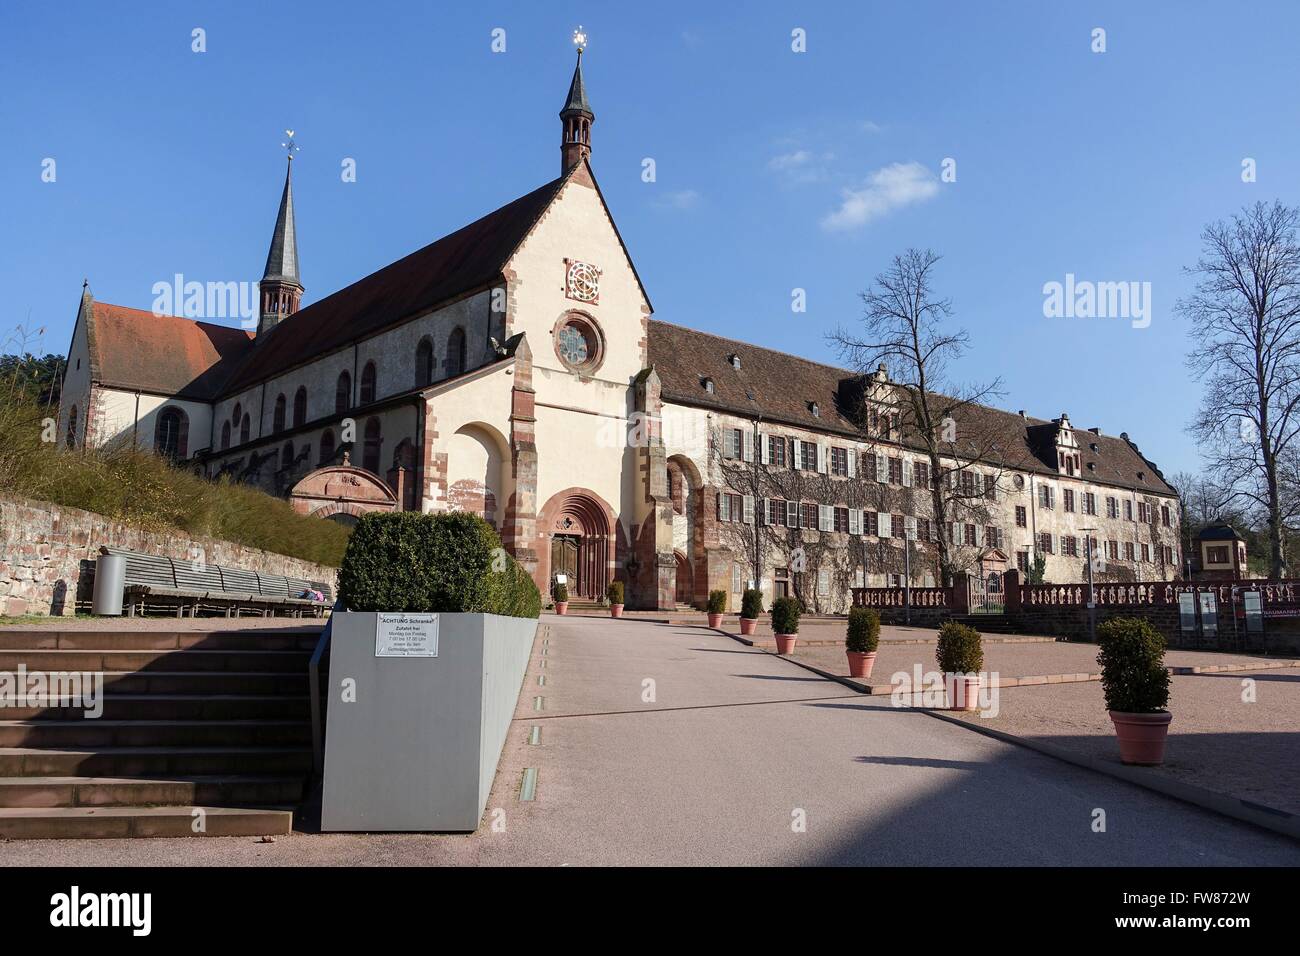 Germany: The prelate of Bronnbach Monastery, Baden-Württemberg. Photo from 26. March 2016. Stock Photo